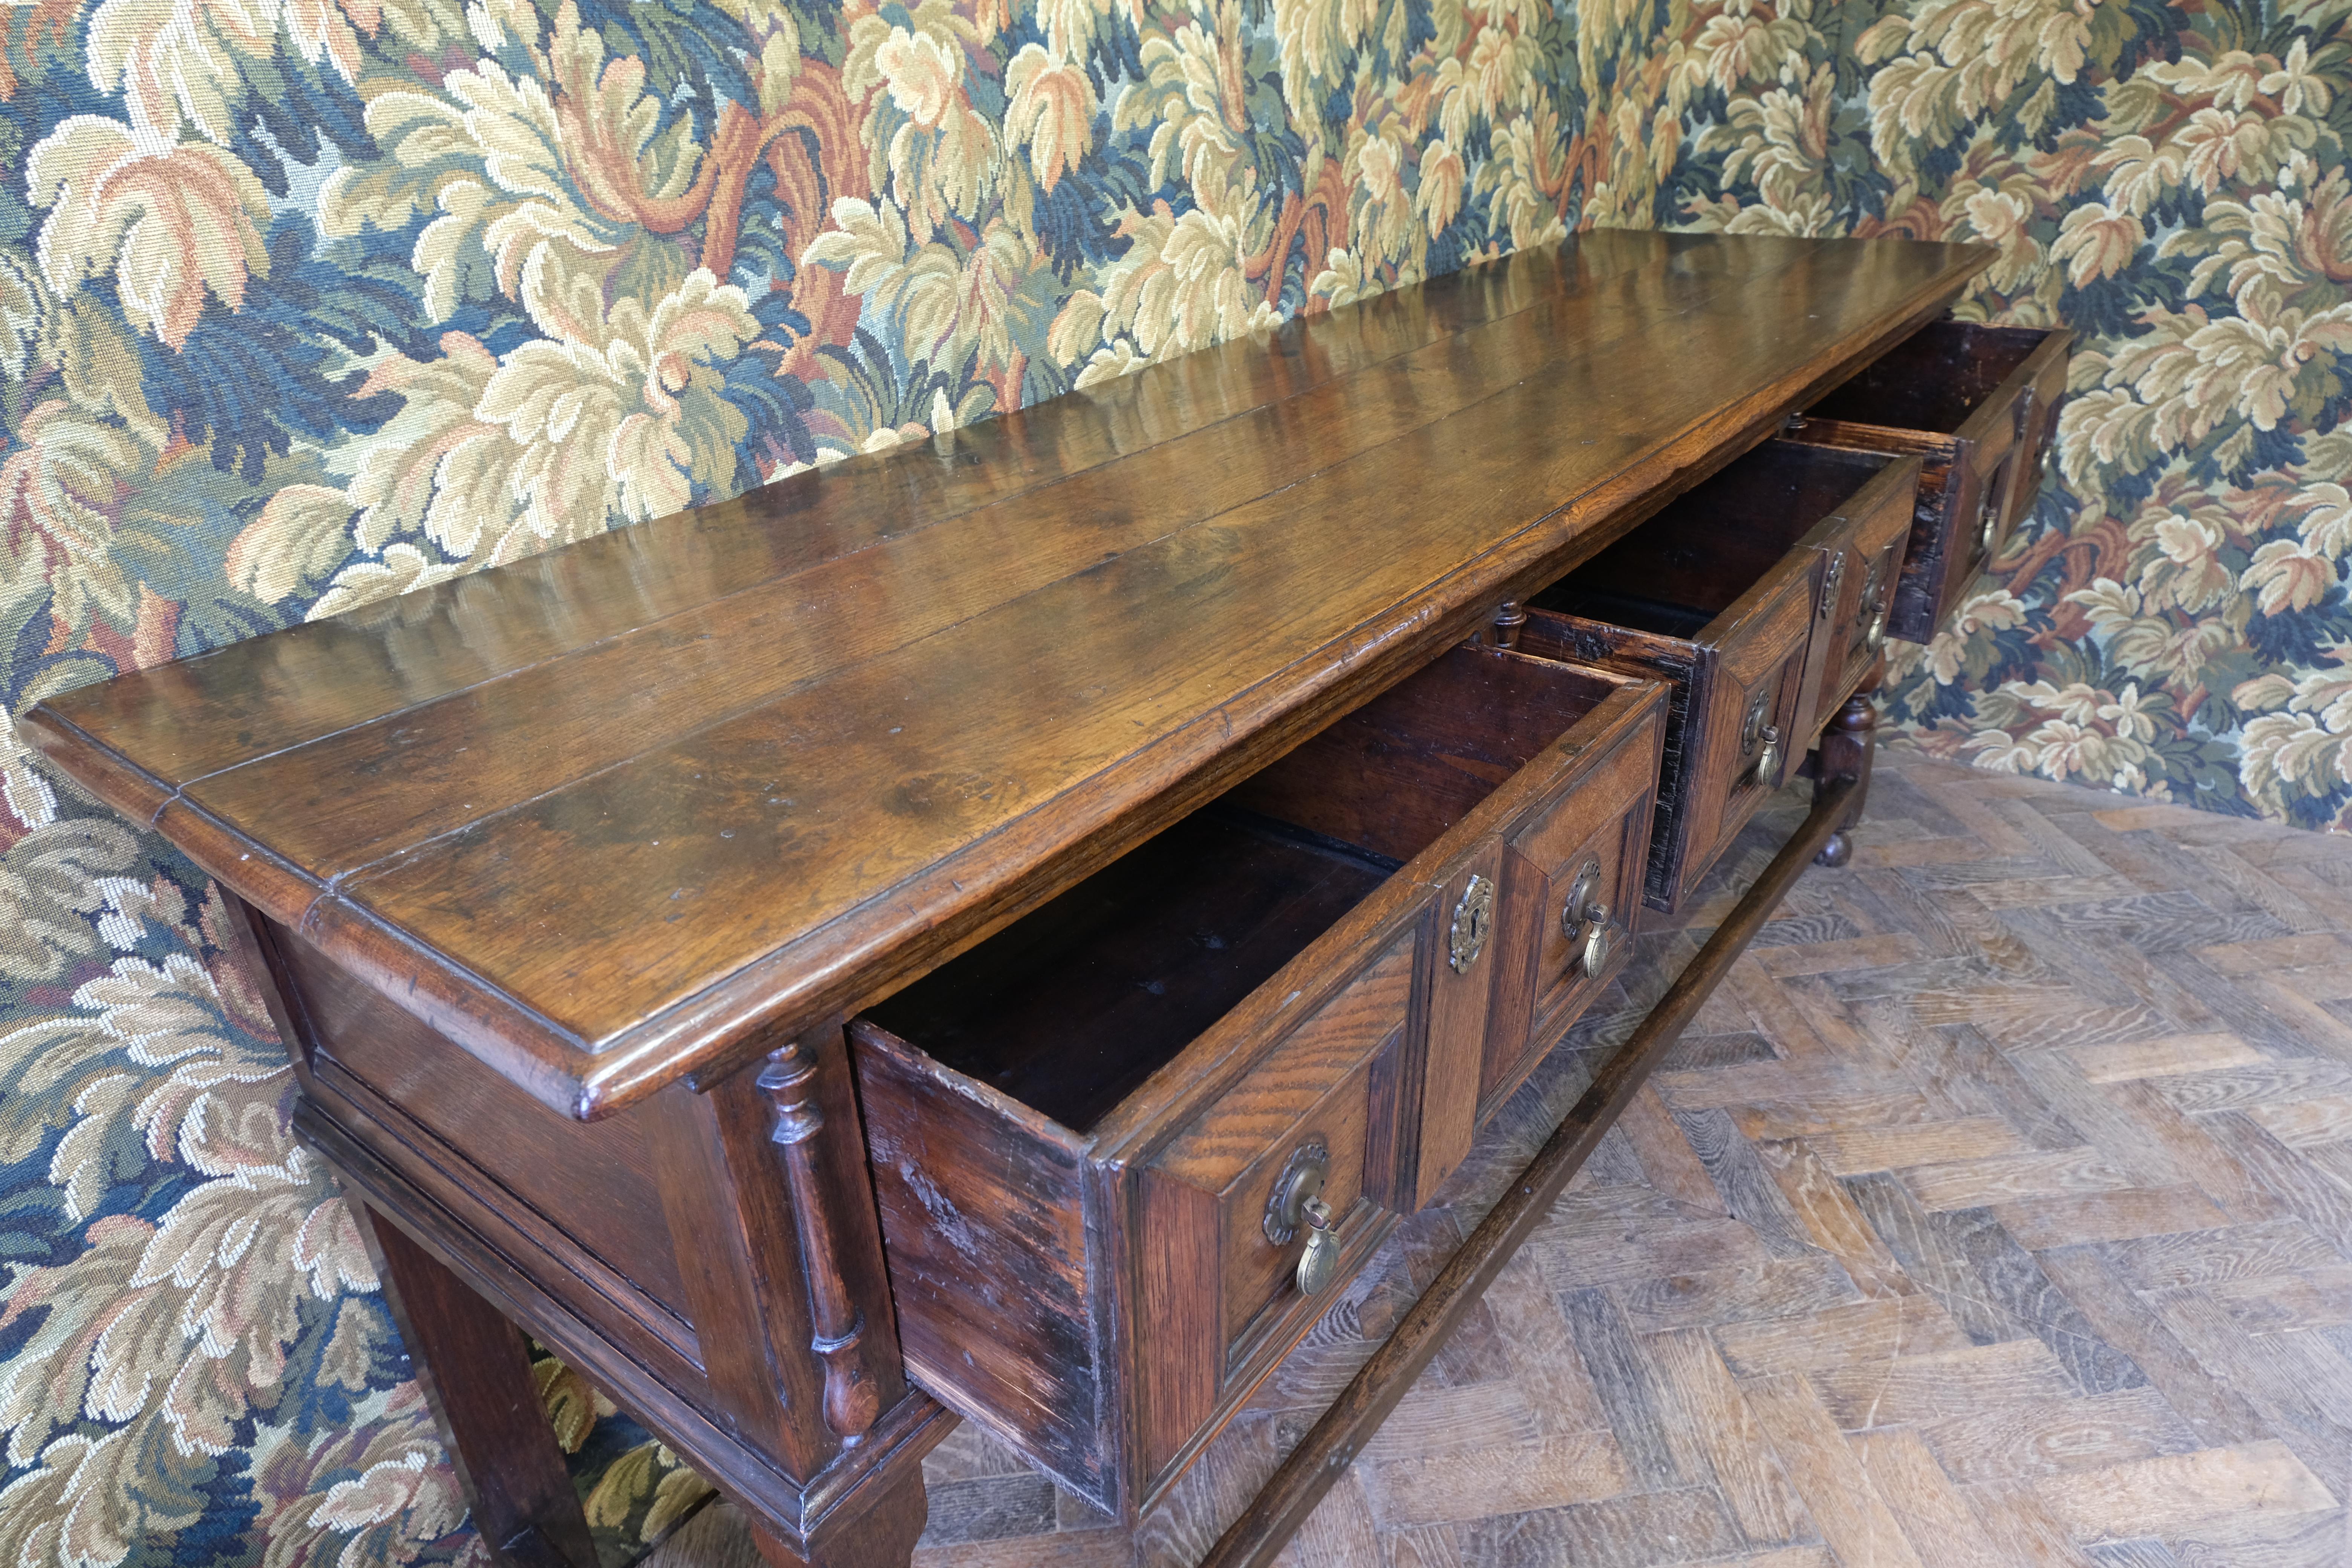 Hutton Clarke Antiques is delighted to present a distinguished 18th-century oak dresser base, dating back to circa 1750. This exquisite piece showcases a solid oak construction, renowned for its enduring strength and captivating grain, which has